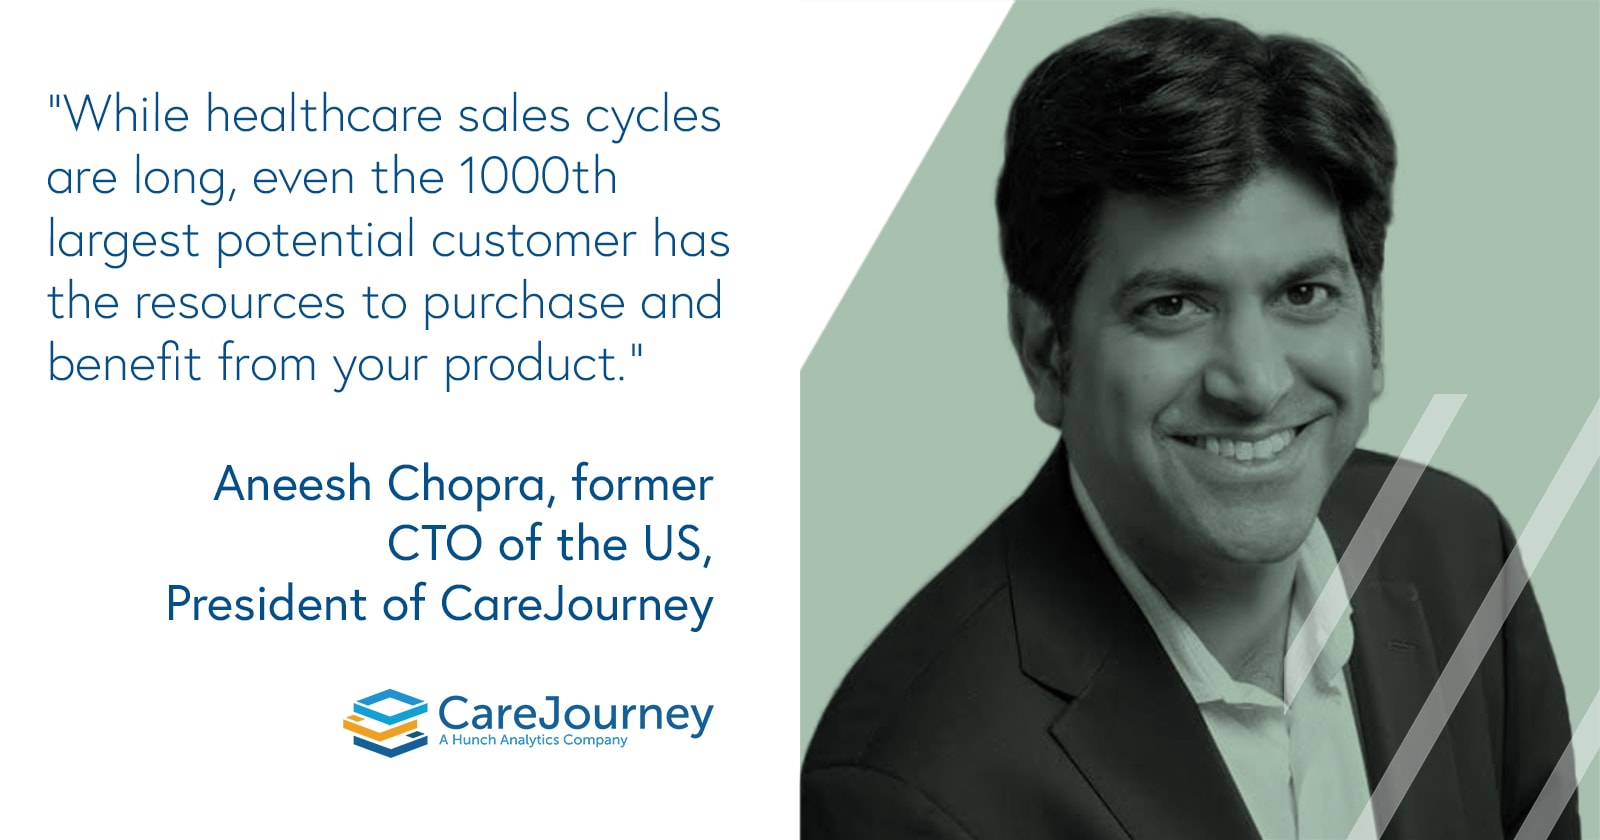 Aneesh Chopra, former CTO of the US, President of CareJourney